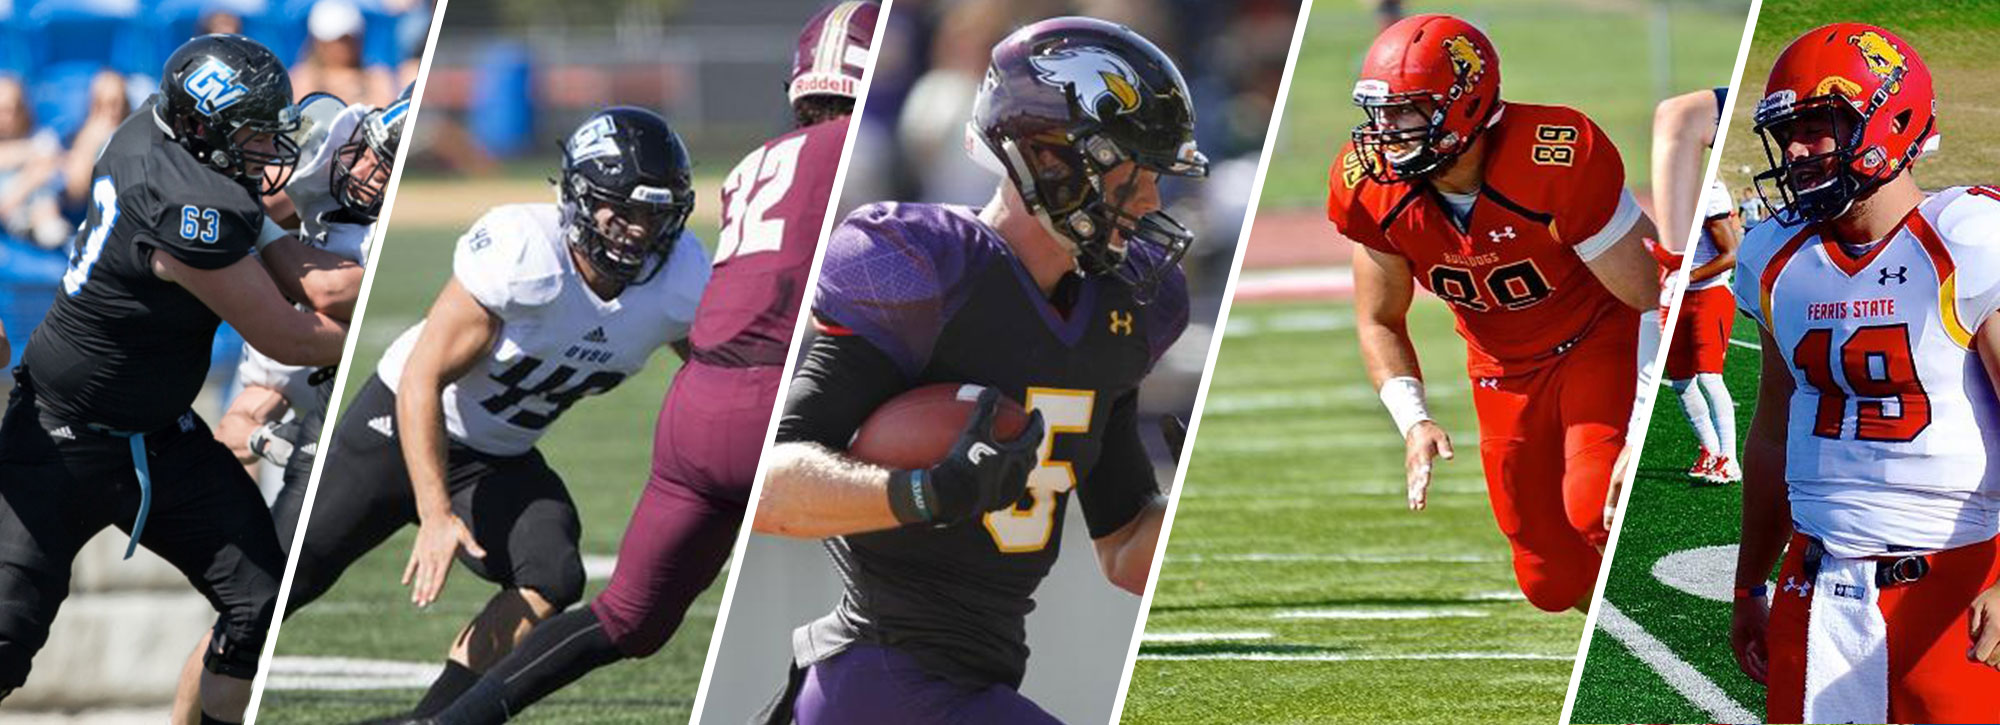 #GLIACFB Lands Five CoSIDA Academic All-District Selections